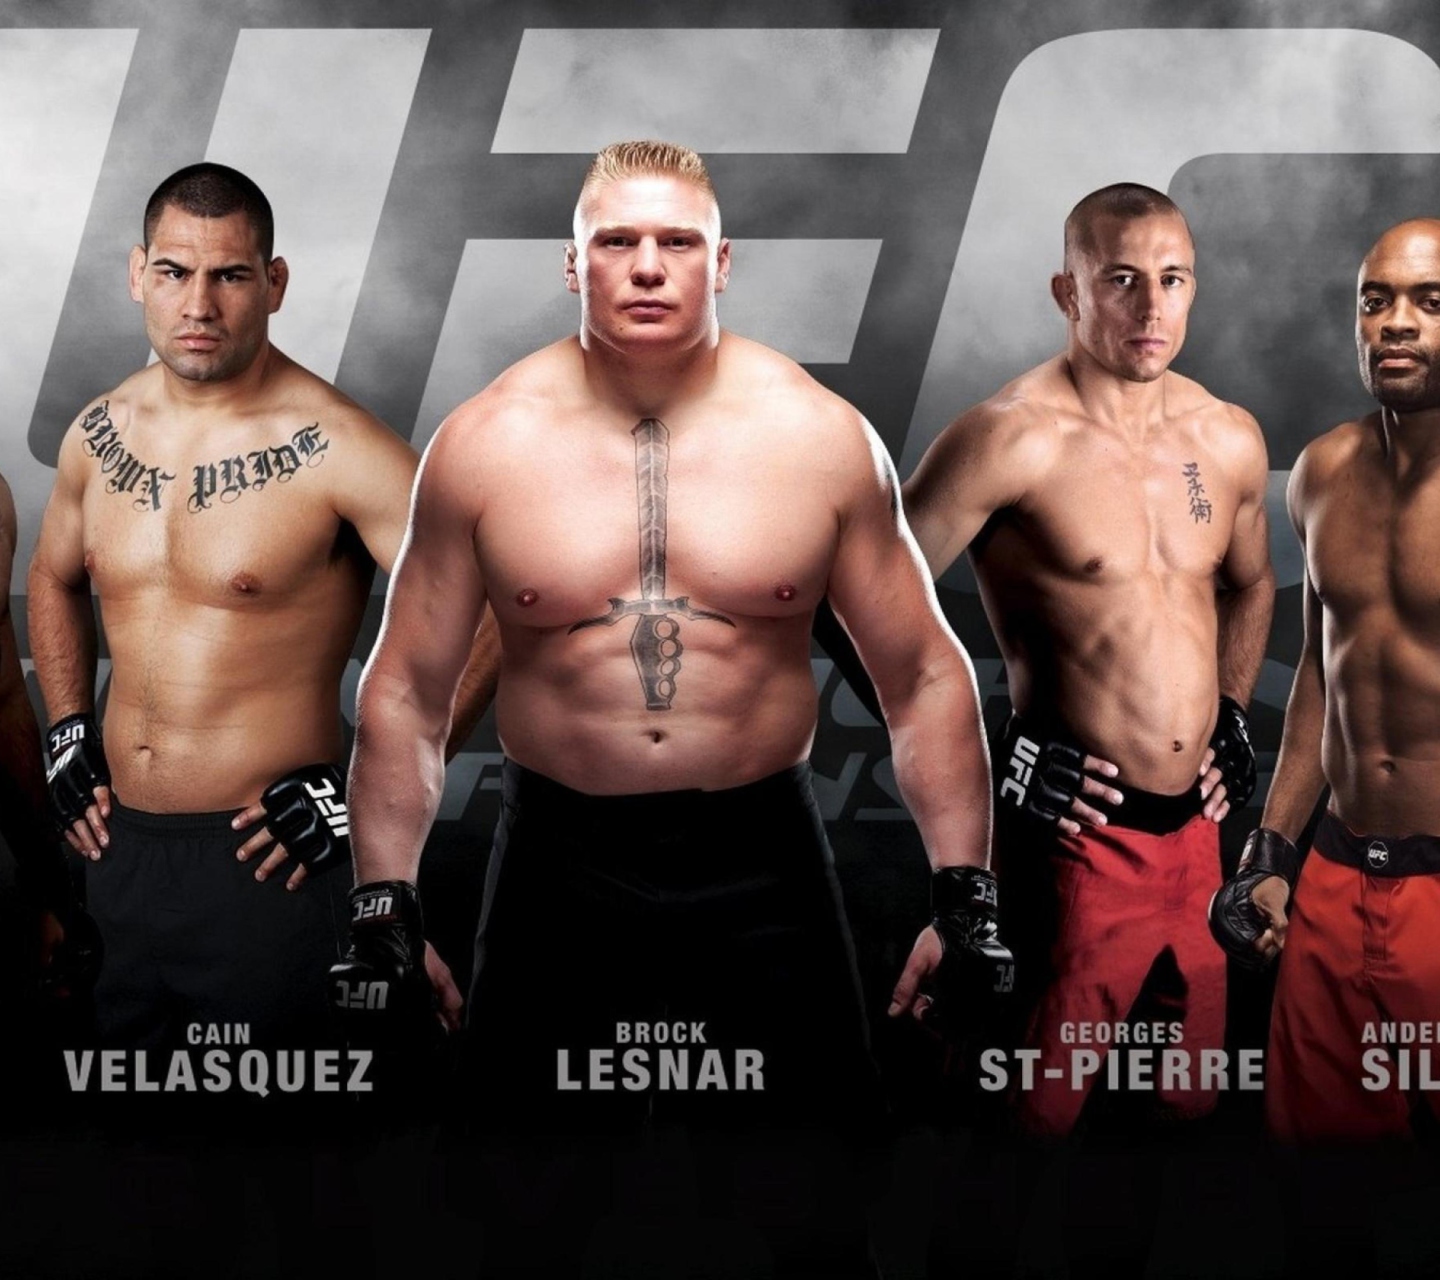 Ufc Mma Mixed Fighters wallpaper 1440x1280